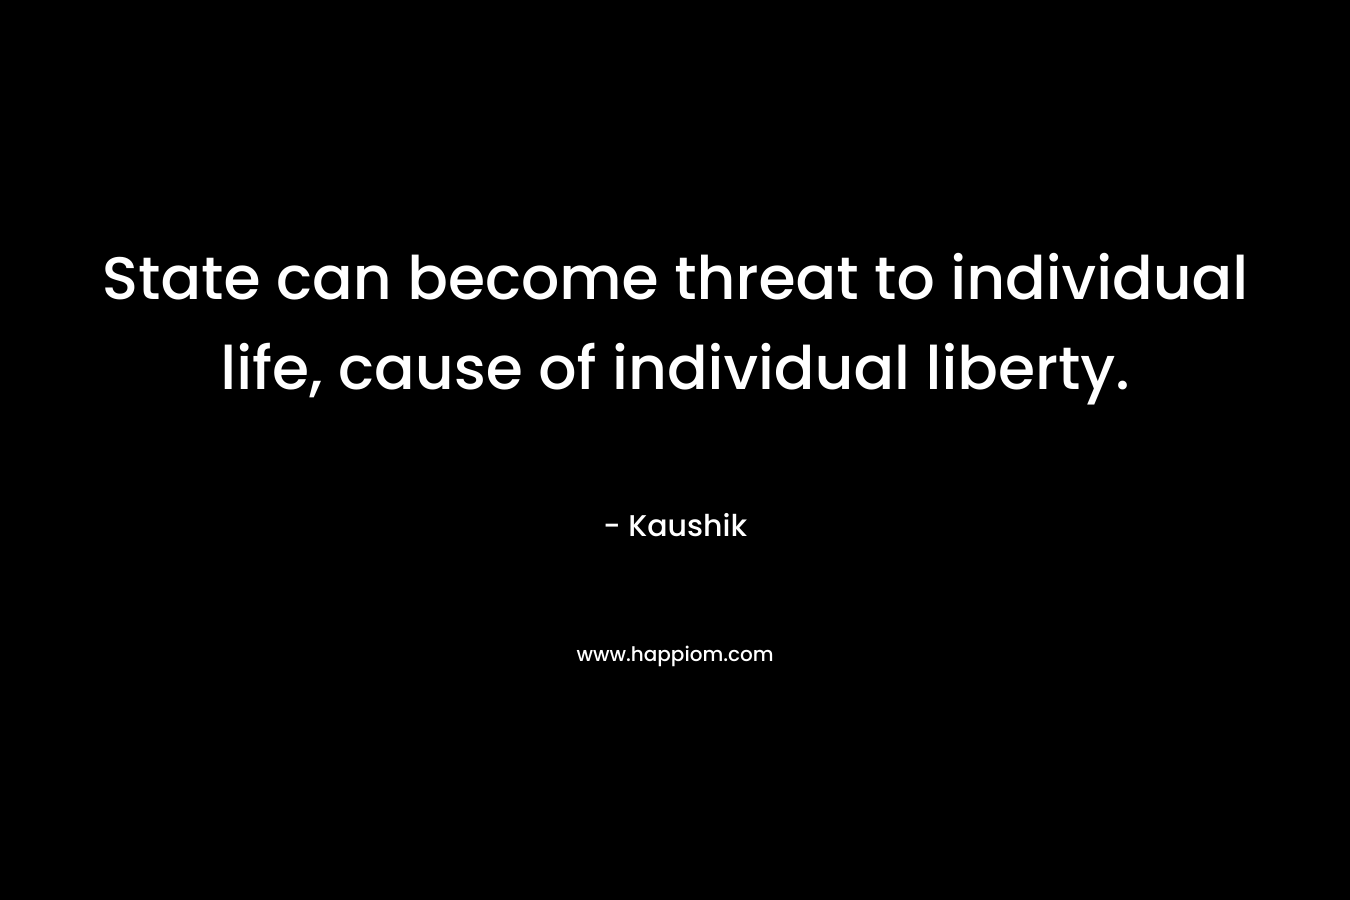 State can become threat to individual life, cause of individual liberty.